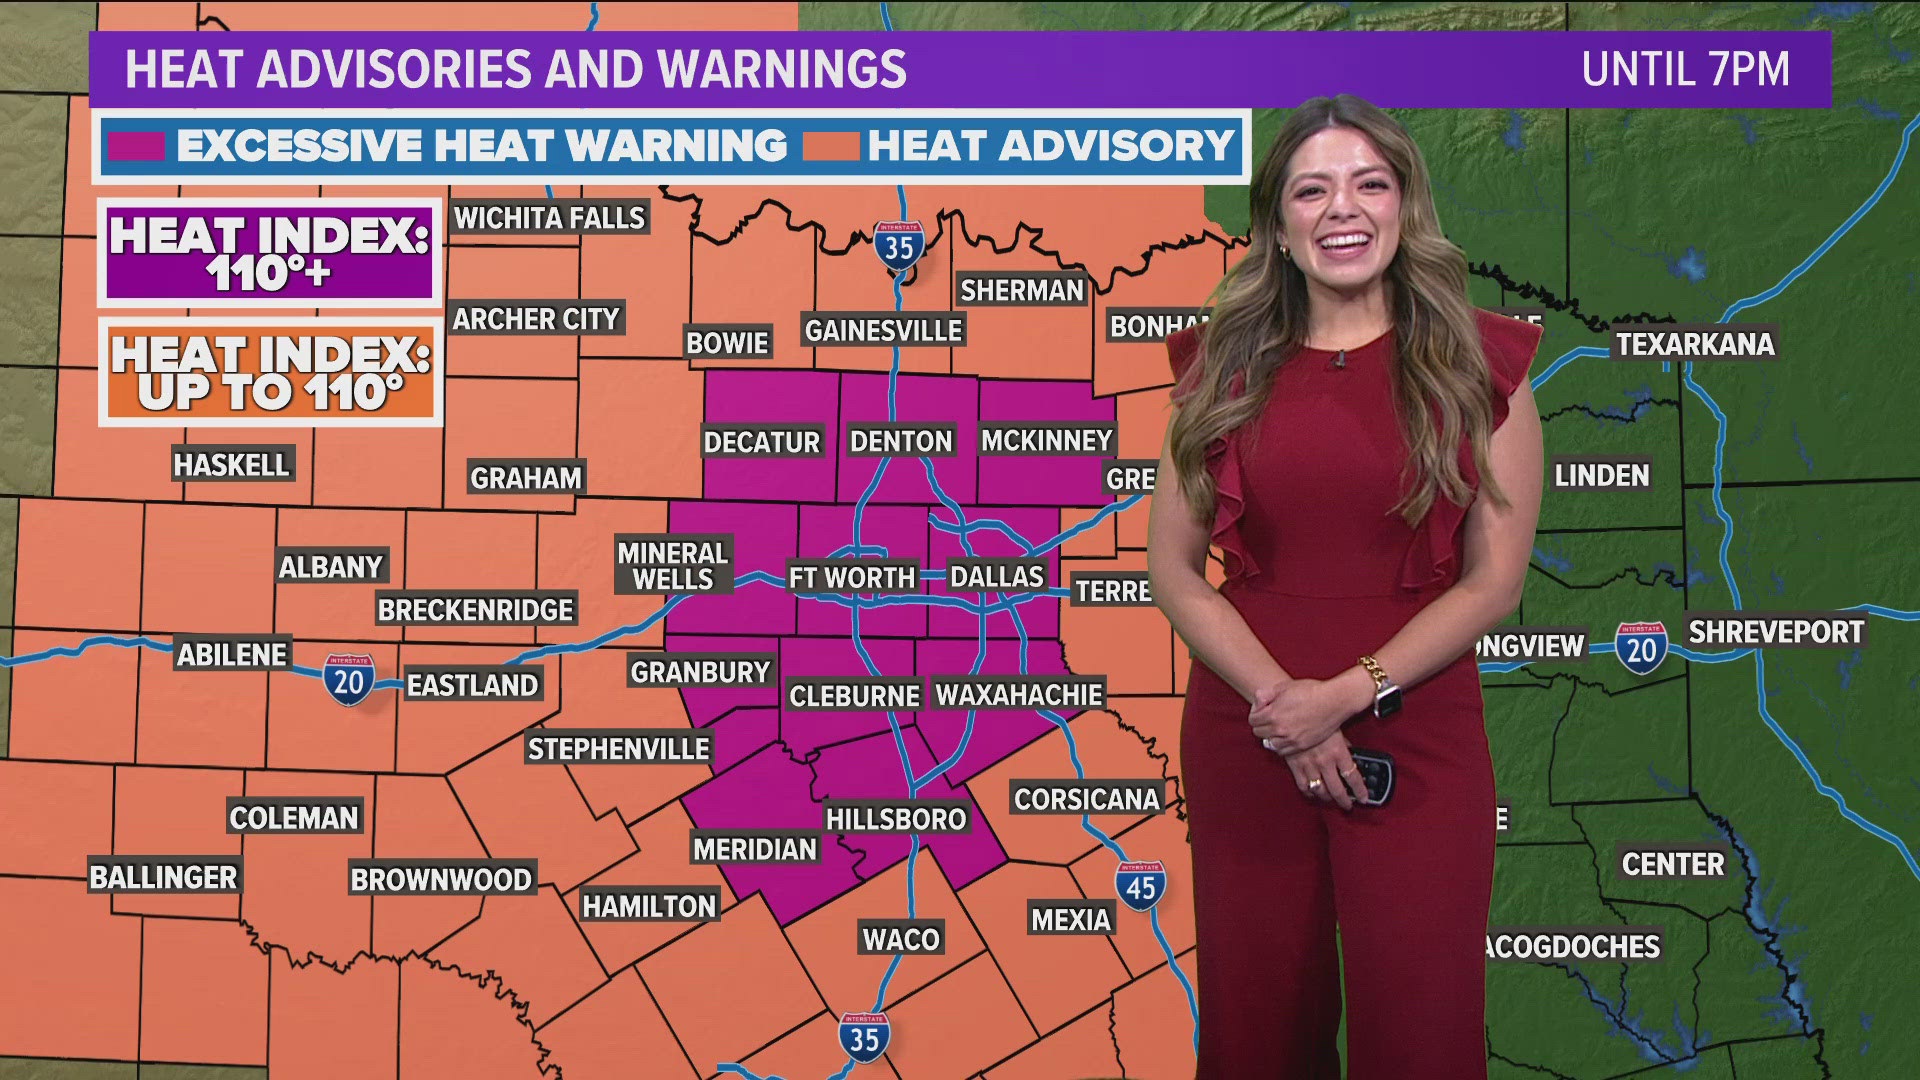 DFW Weather: Excessive Heat Warnings issued for Dallas-Forth Worth and other North Texas locations